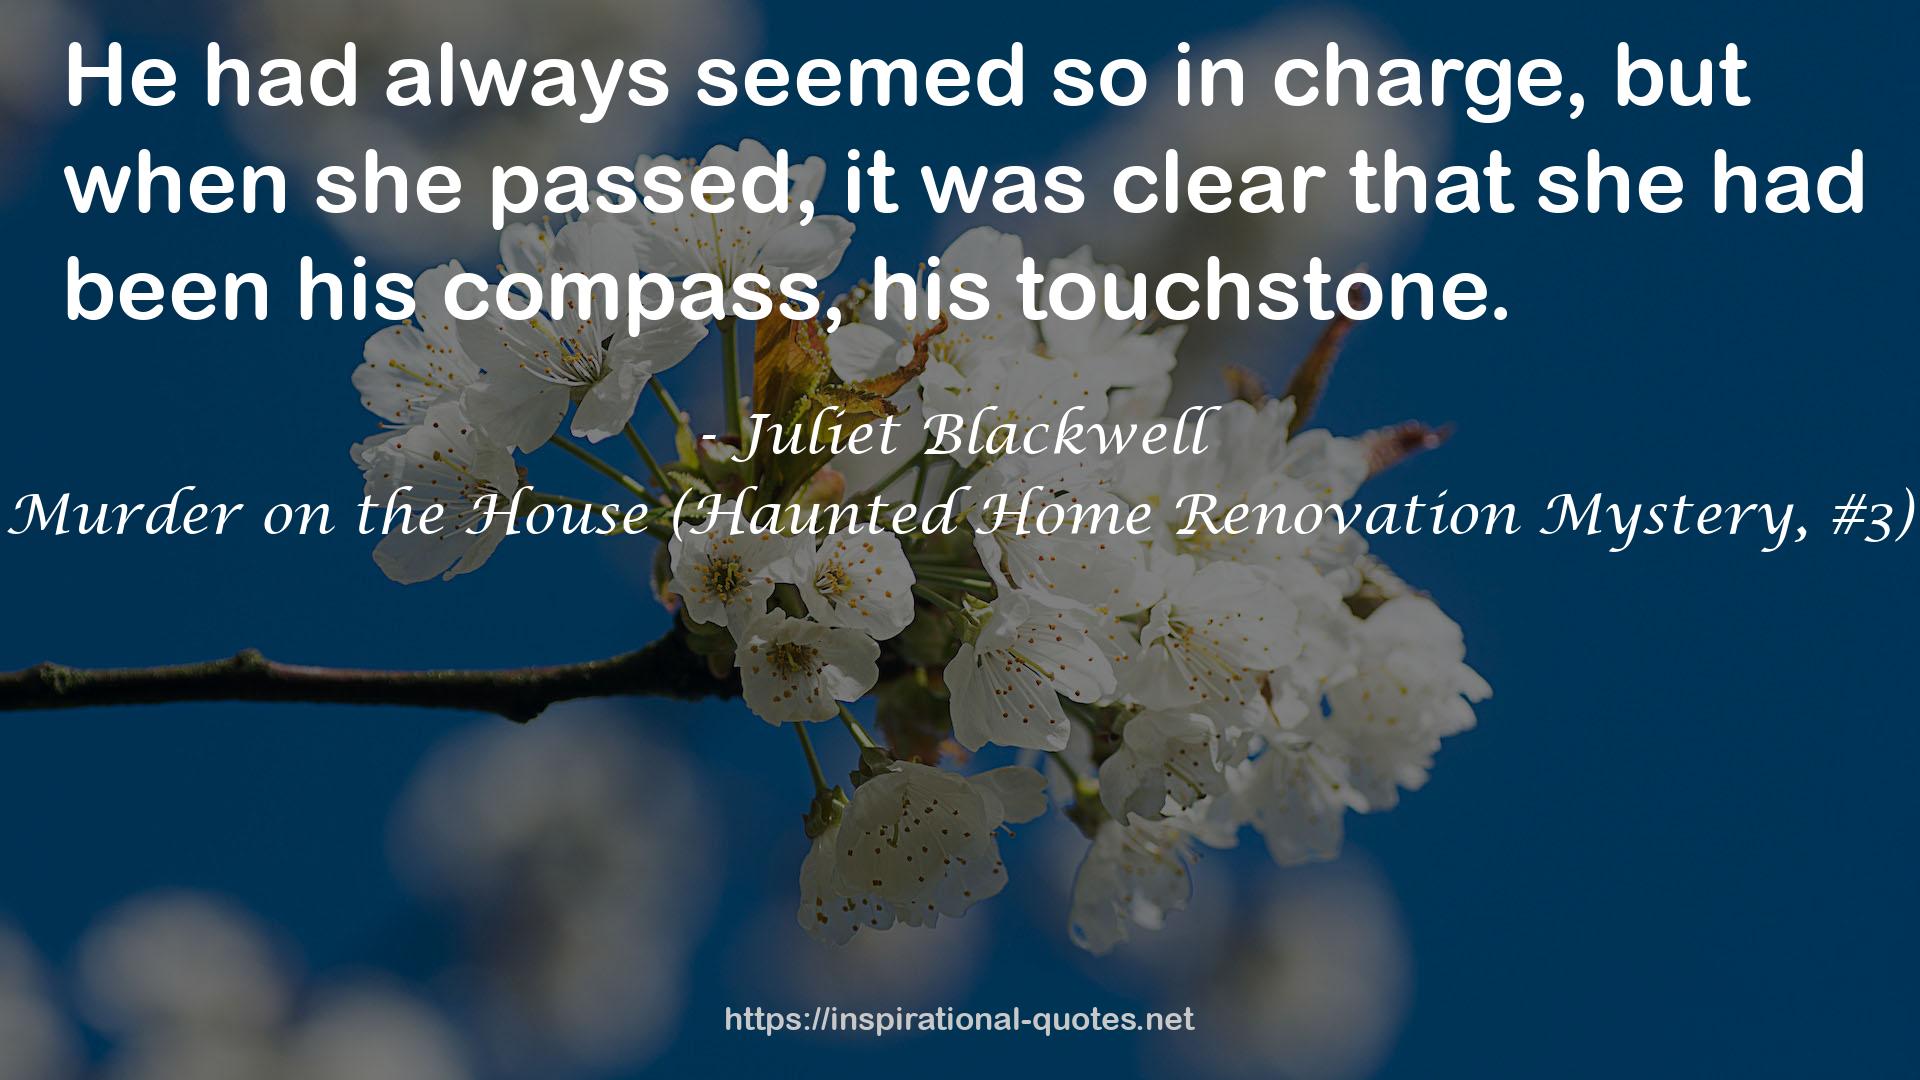 Murder on the House (Haunted Home Renovation Mystery, #3) QUOTES